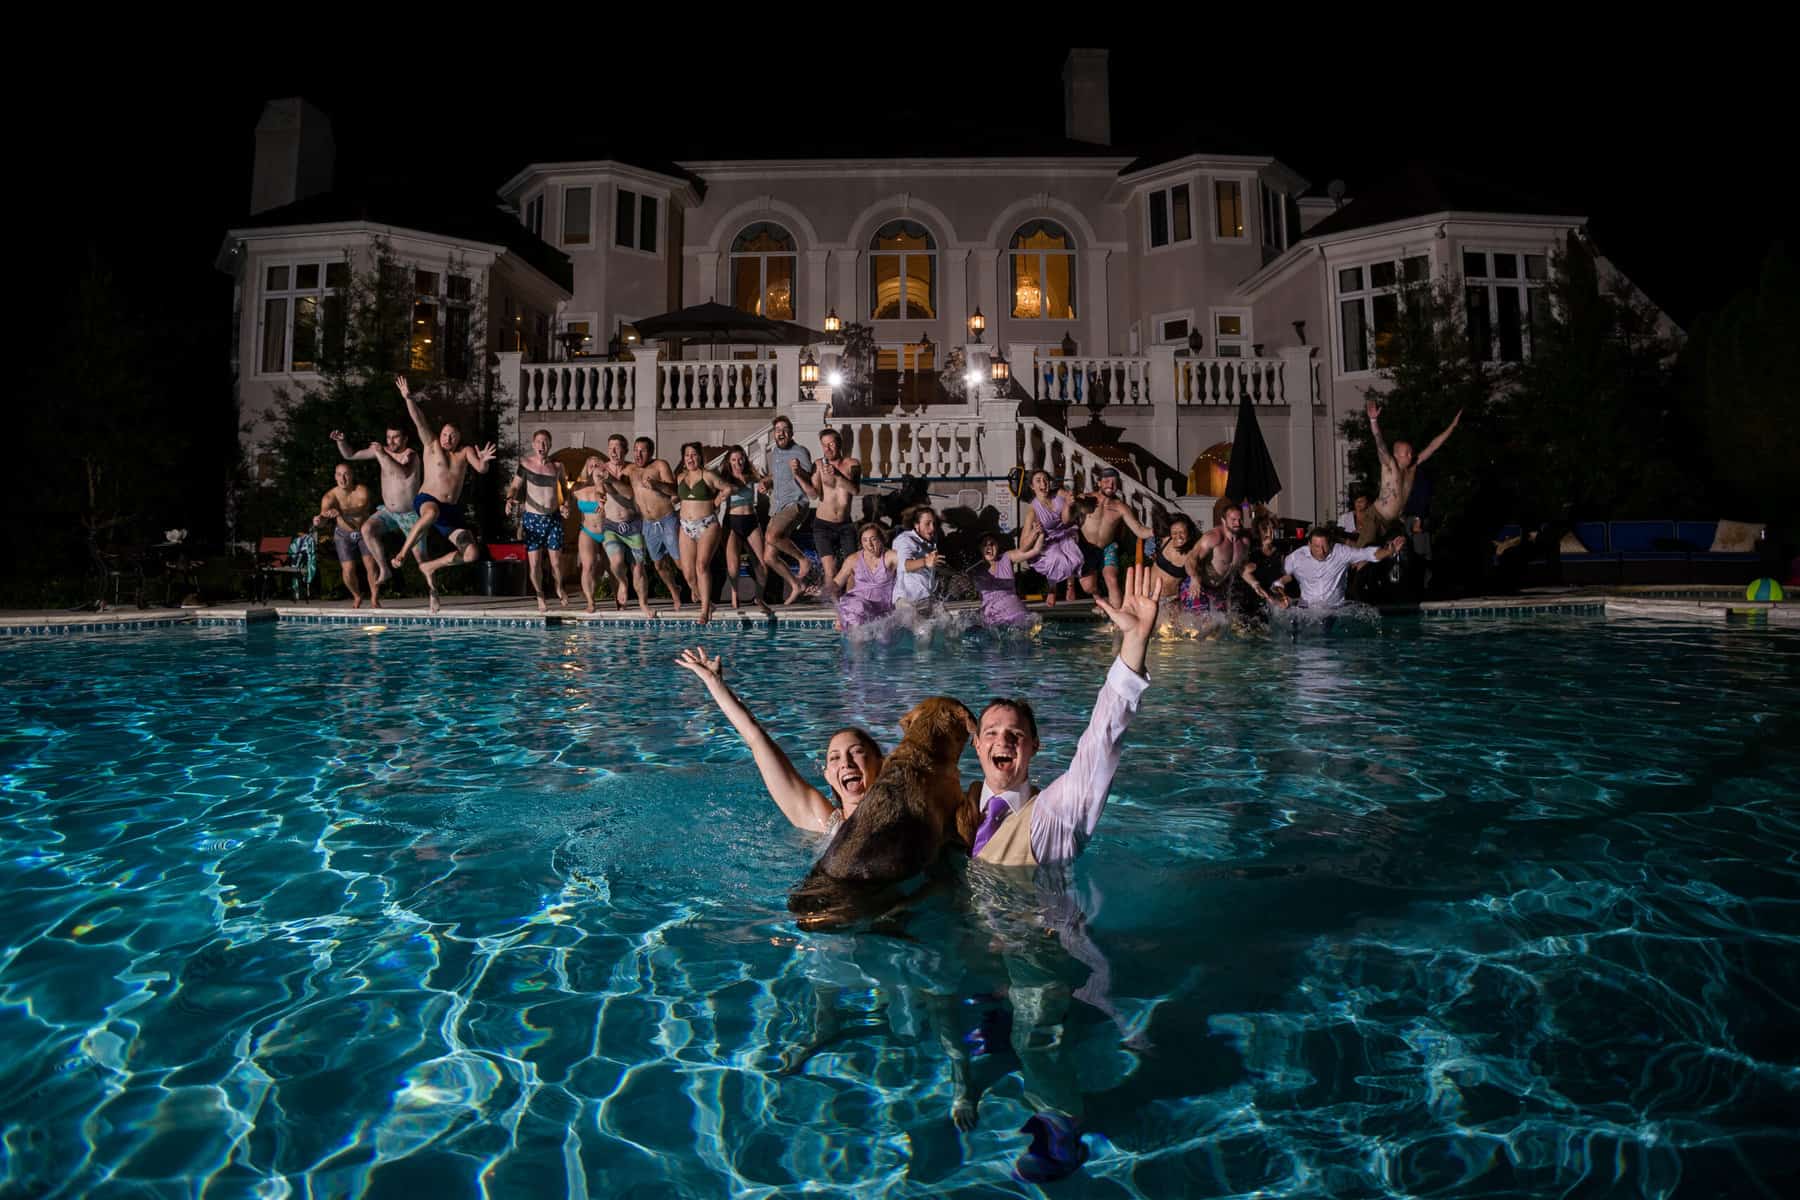 A group of people in a pool at night.